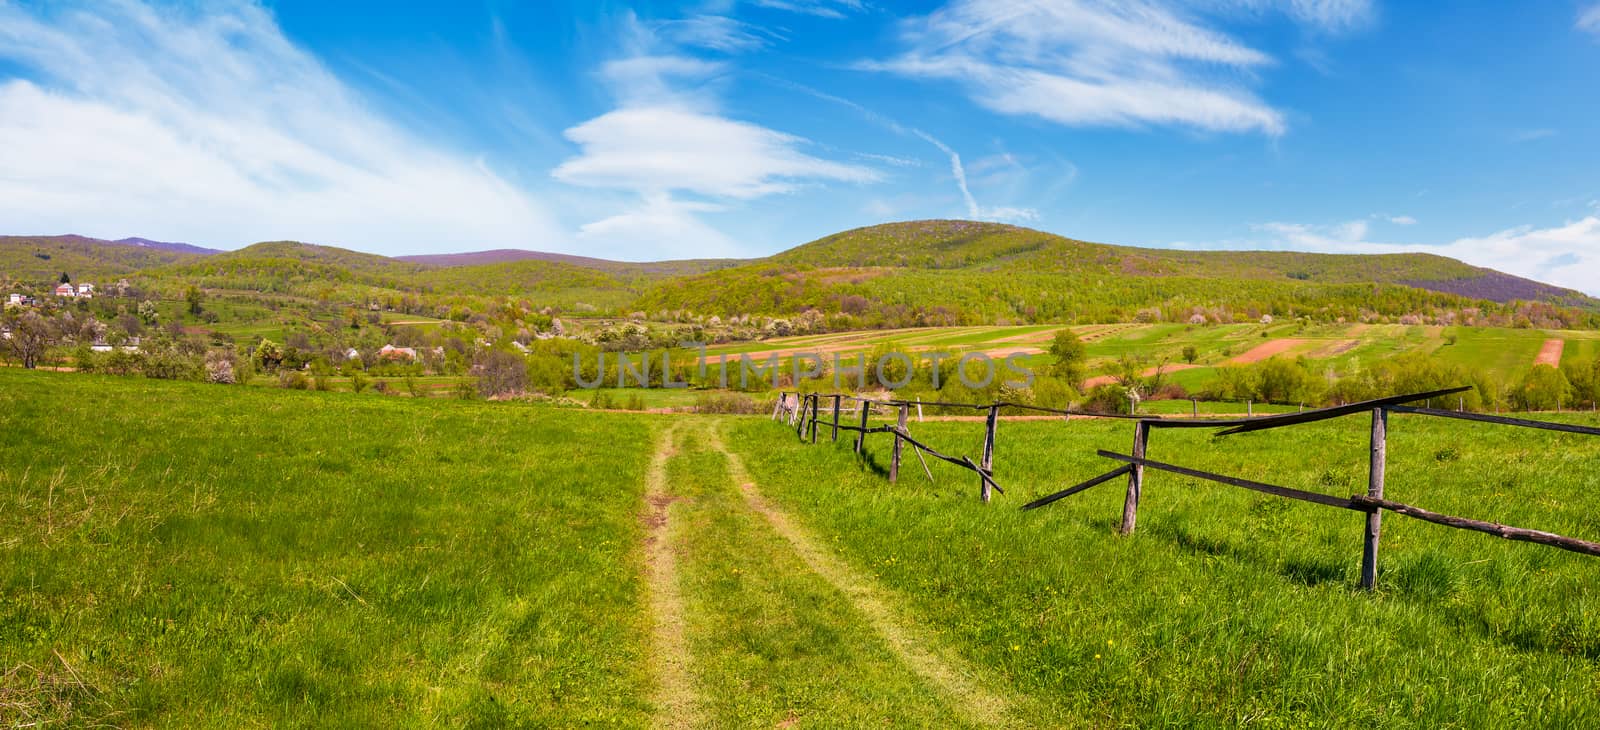 panorama of mountainous rural area in springtime. lovely countryside scenery with wooden fence along the country road in the village outskirts